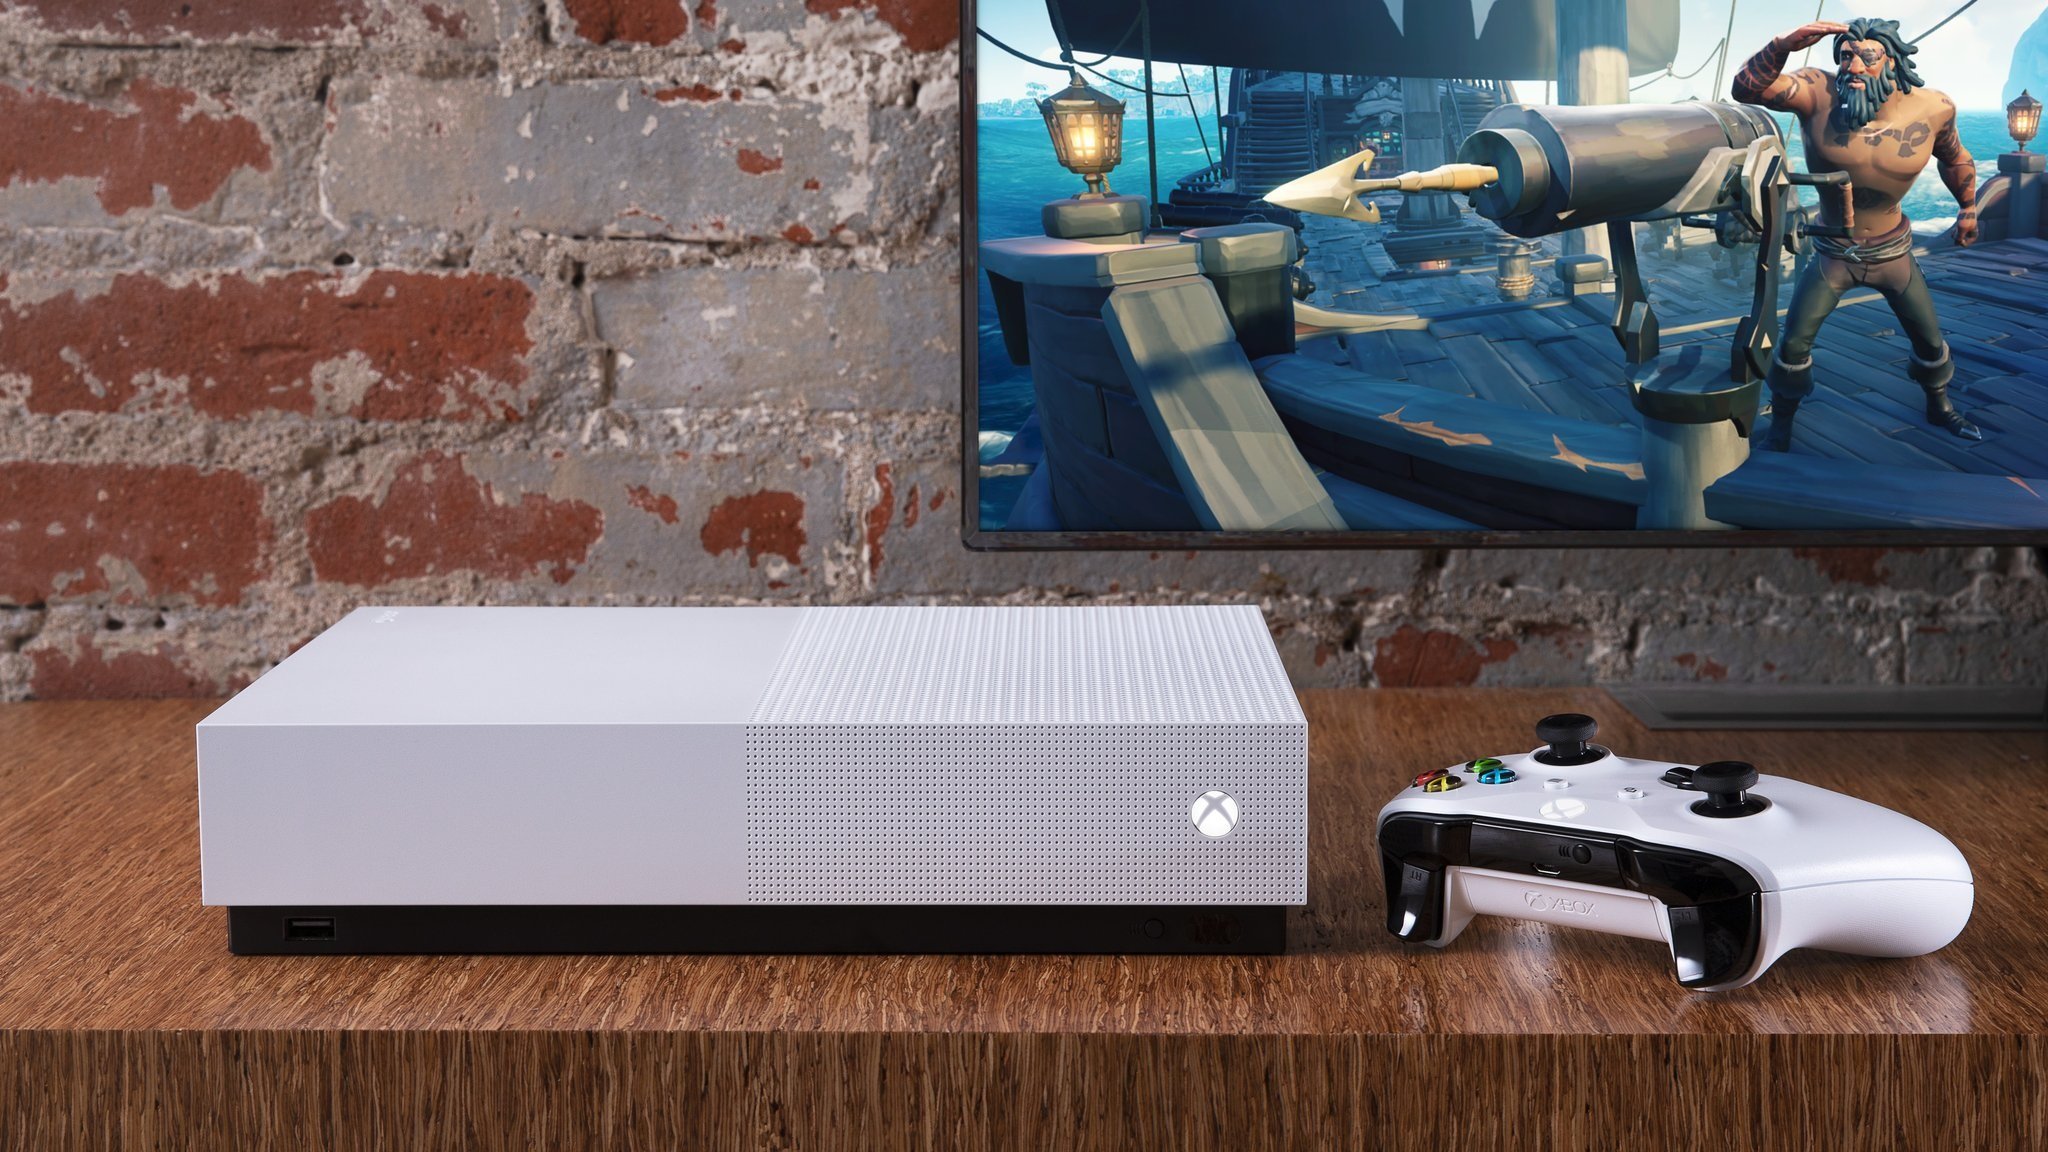 Xbox One X and Xbox One S All-Digital discontinued ahead of Xbox